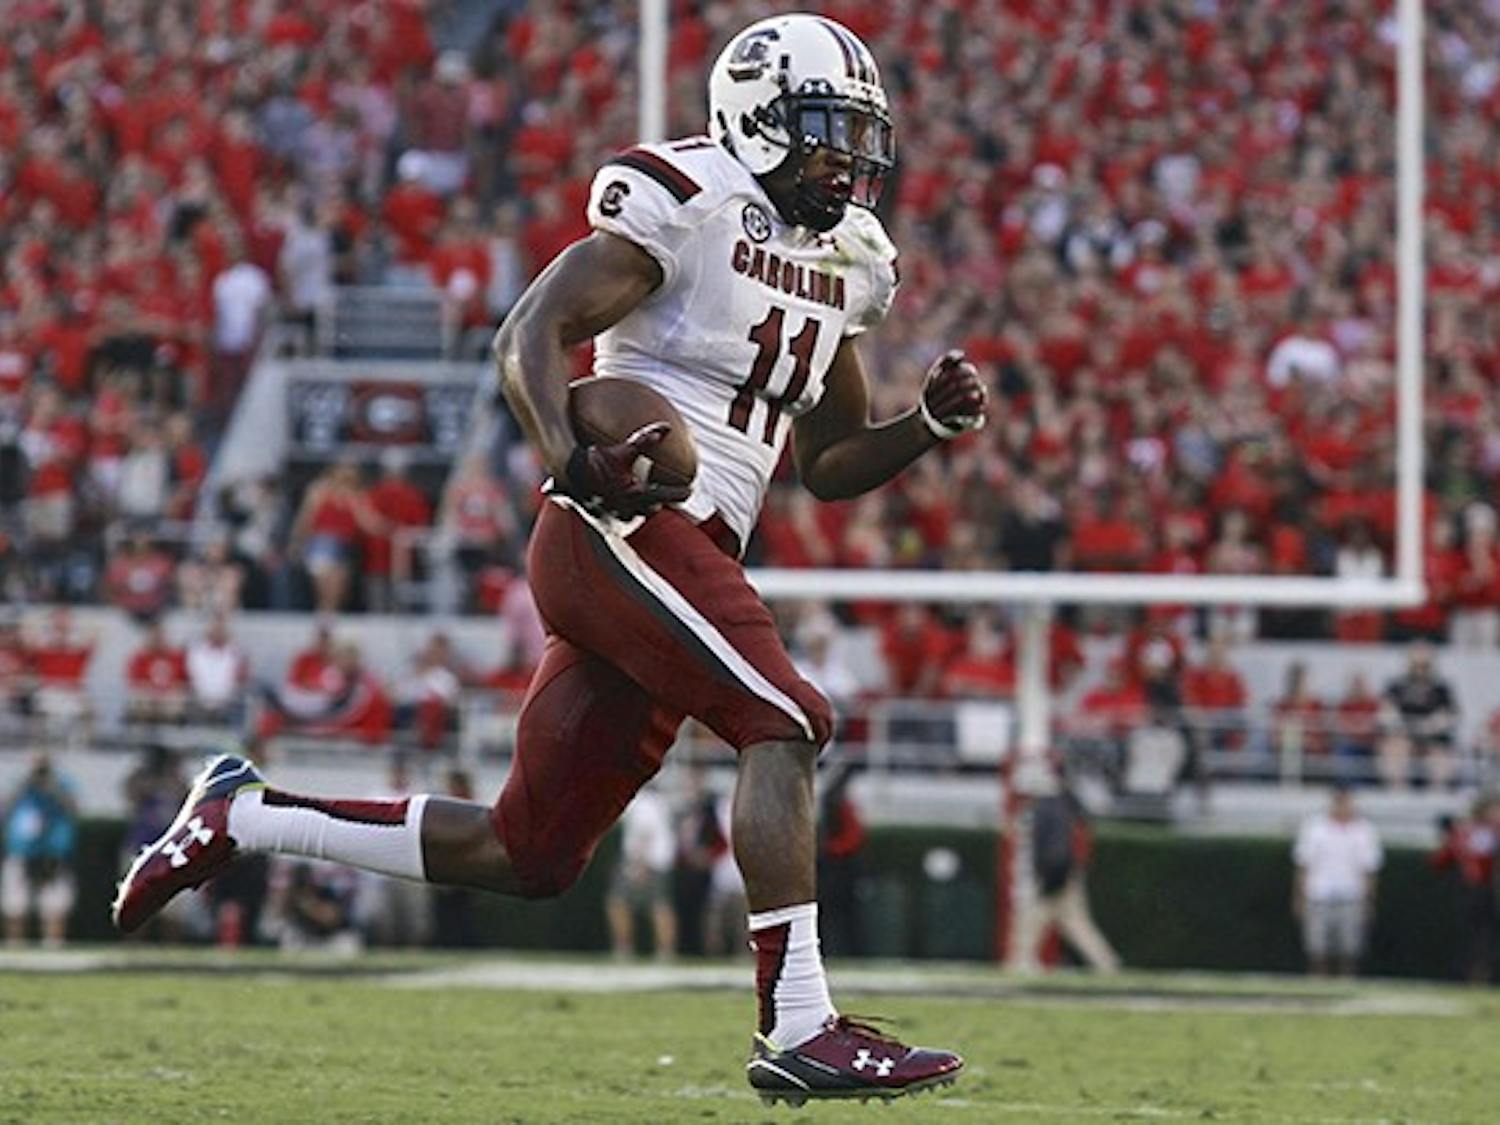 The Gamecocks had a total of 445 yards for a season high against Texas A&amp;M.